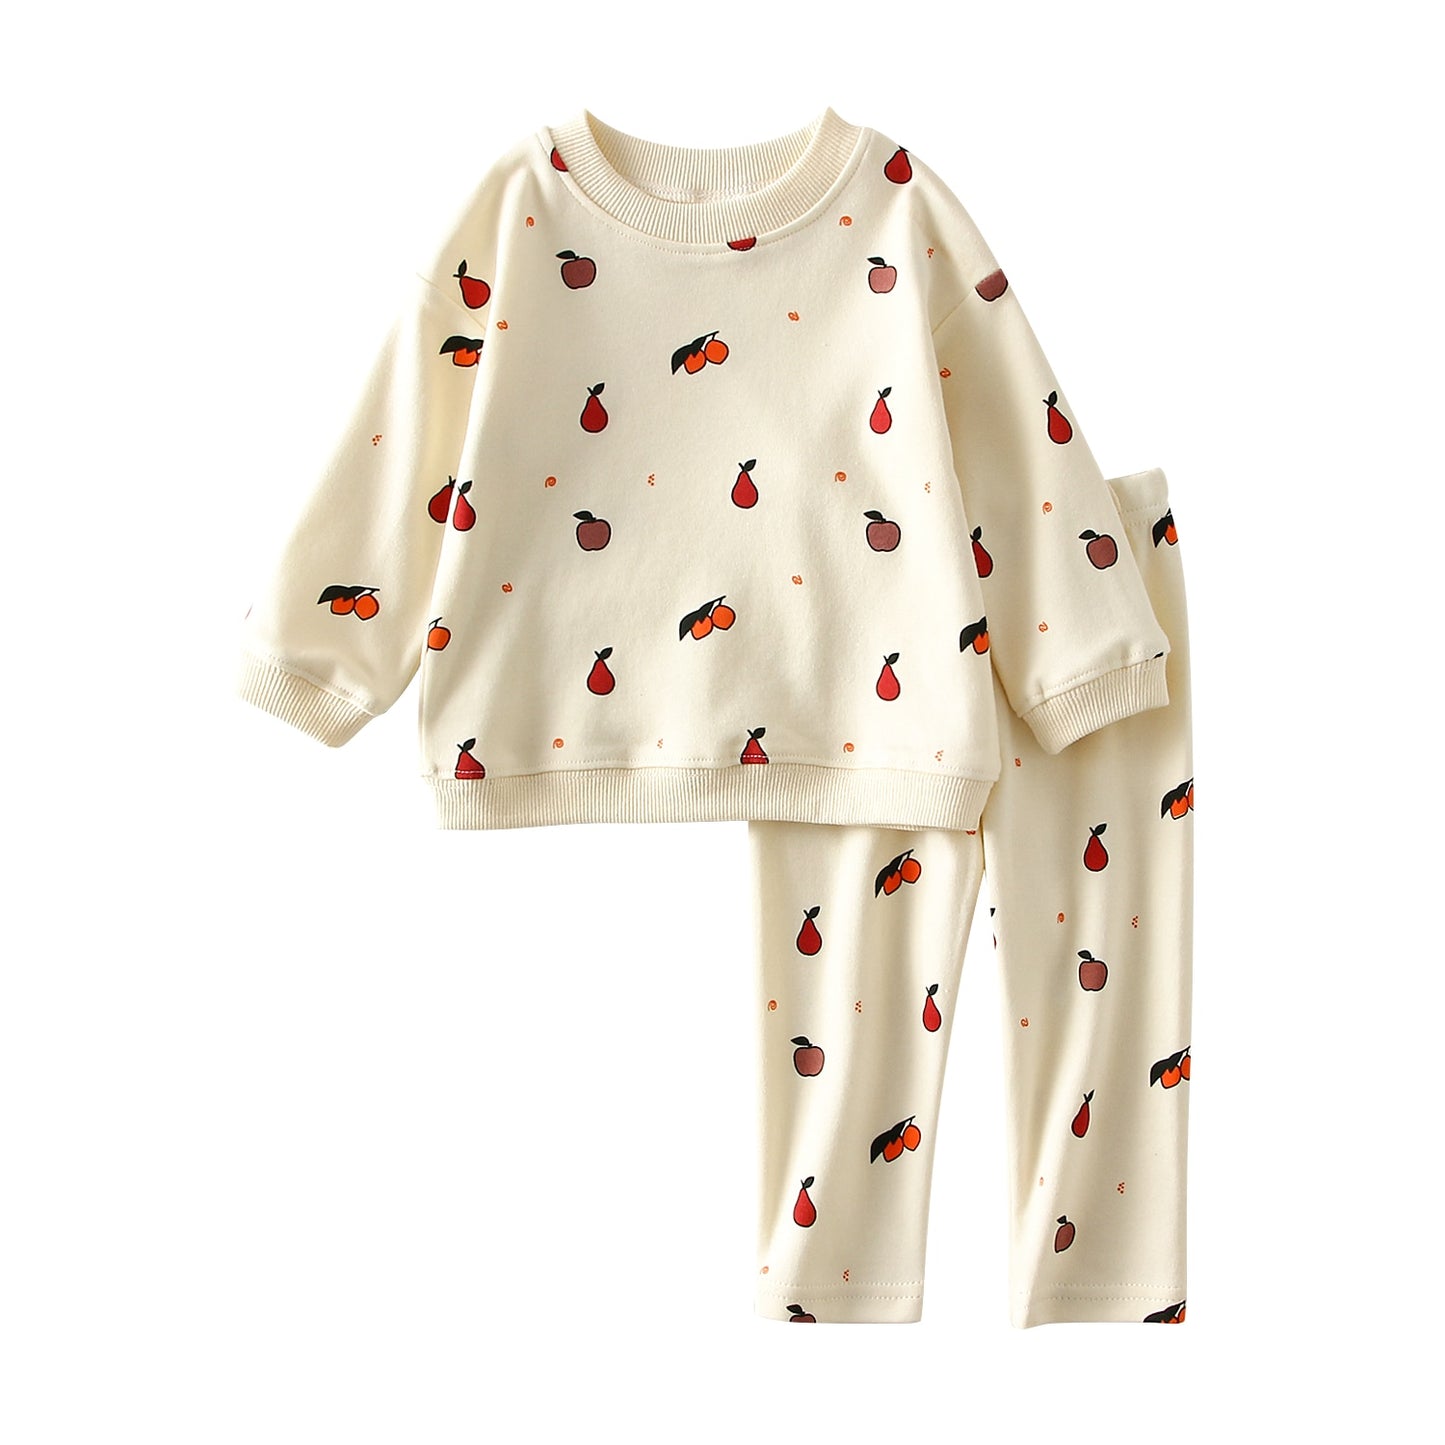 2 pc Set: Baby 0-5T Matching Fruit Print Sweater Top and Bottom Set